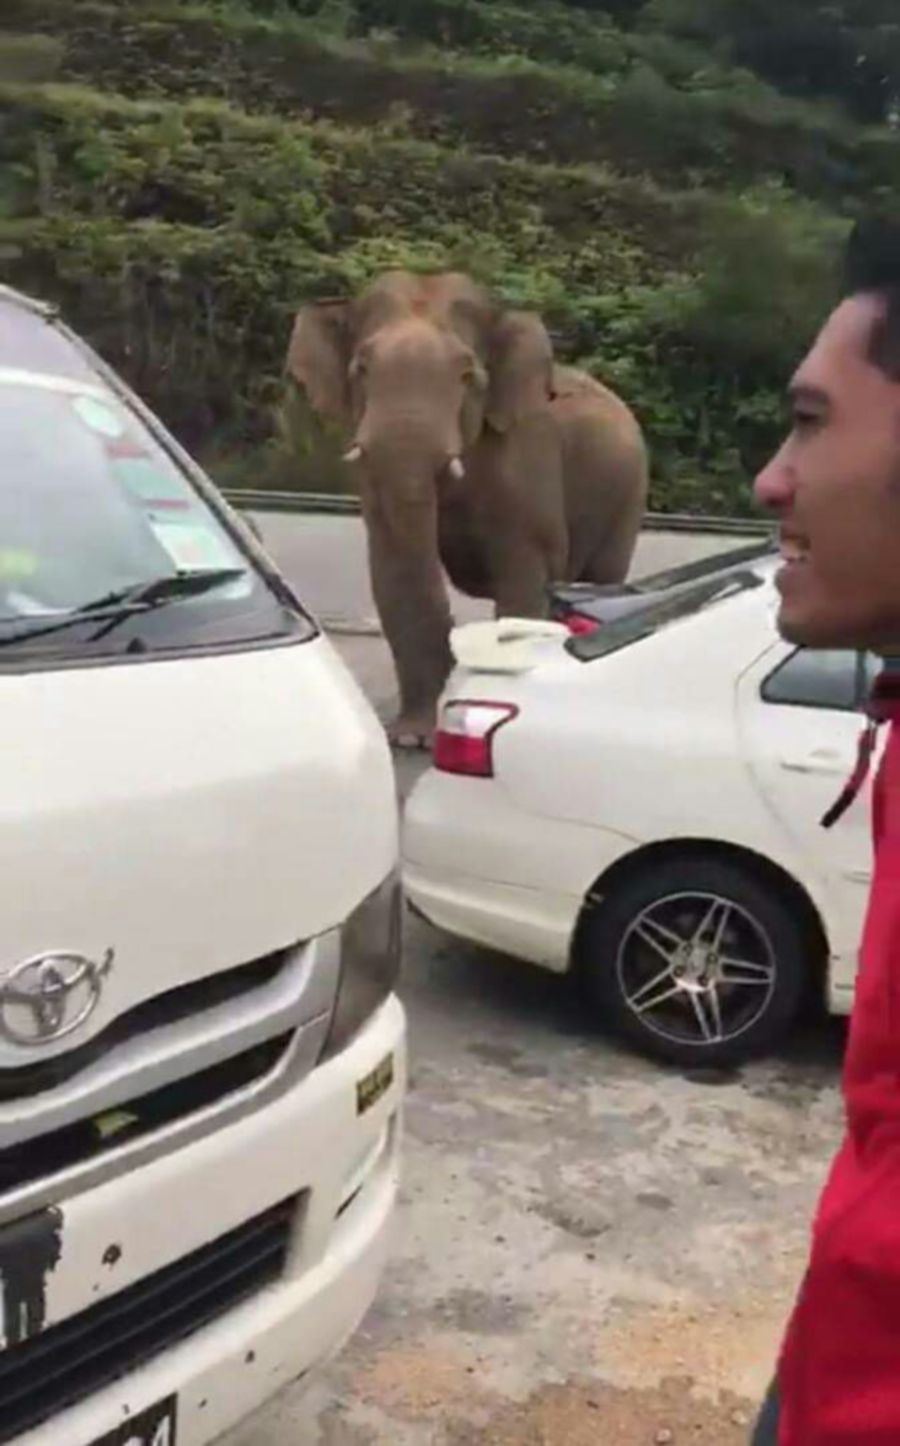 Travellers who stopped at the R&R near Puncak Titiwangsa, Gerik, were terrified when an elephant appeared at the rest and relax area before destroying fences in the compound. (pix by NSTP/courtesy of NST readers)